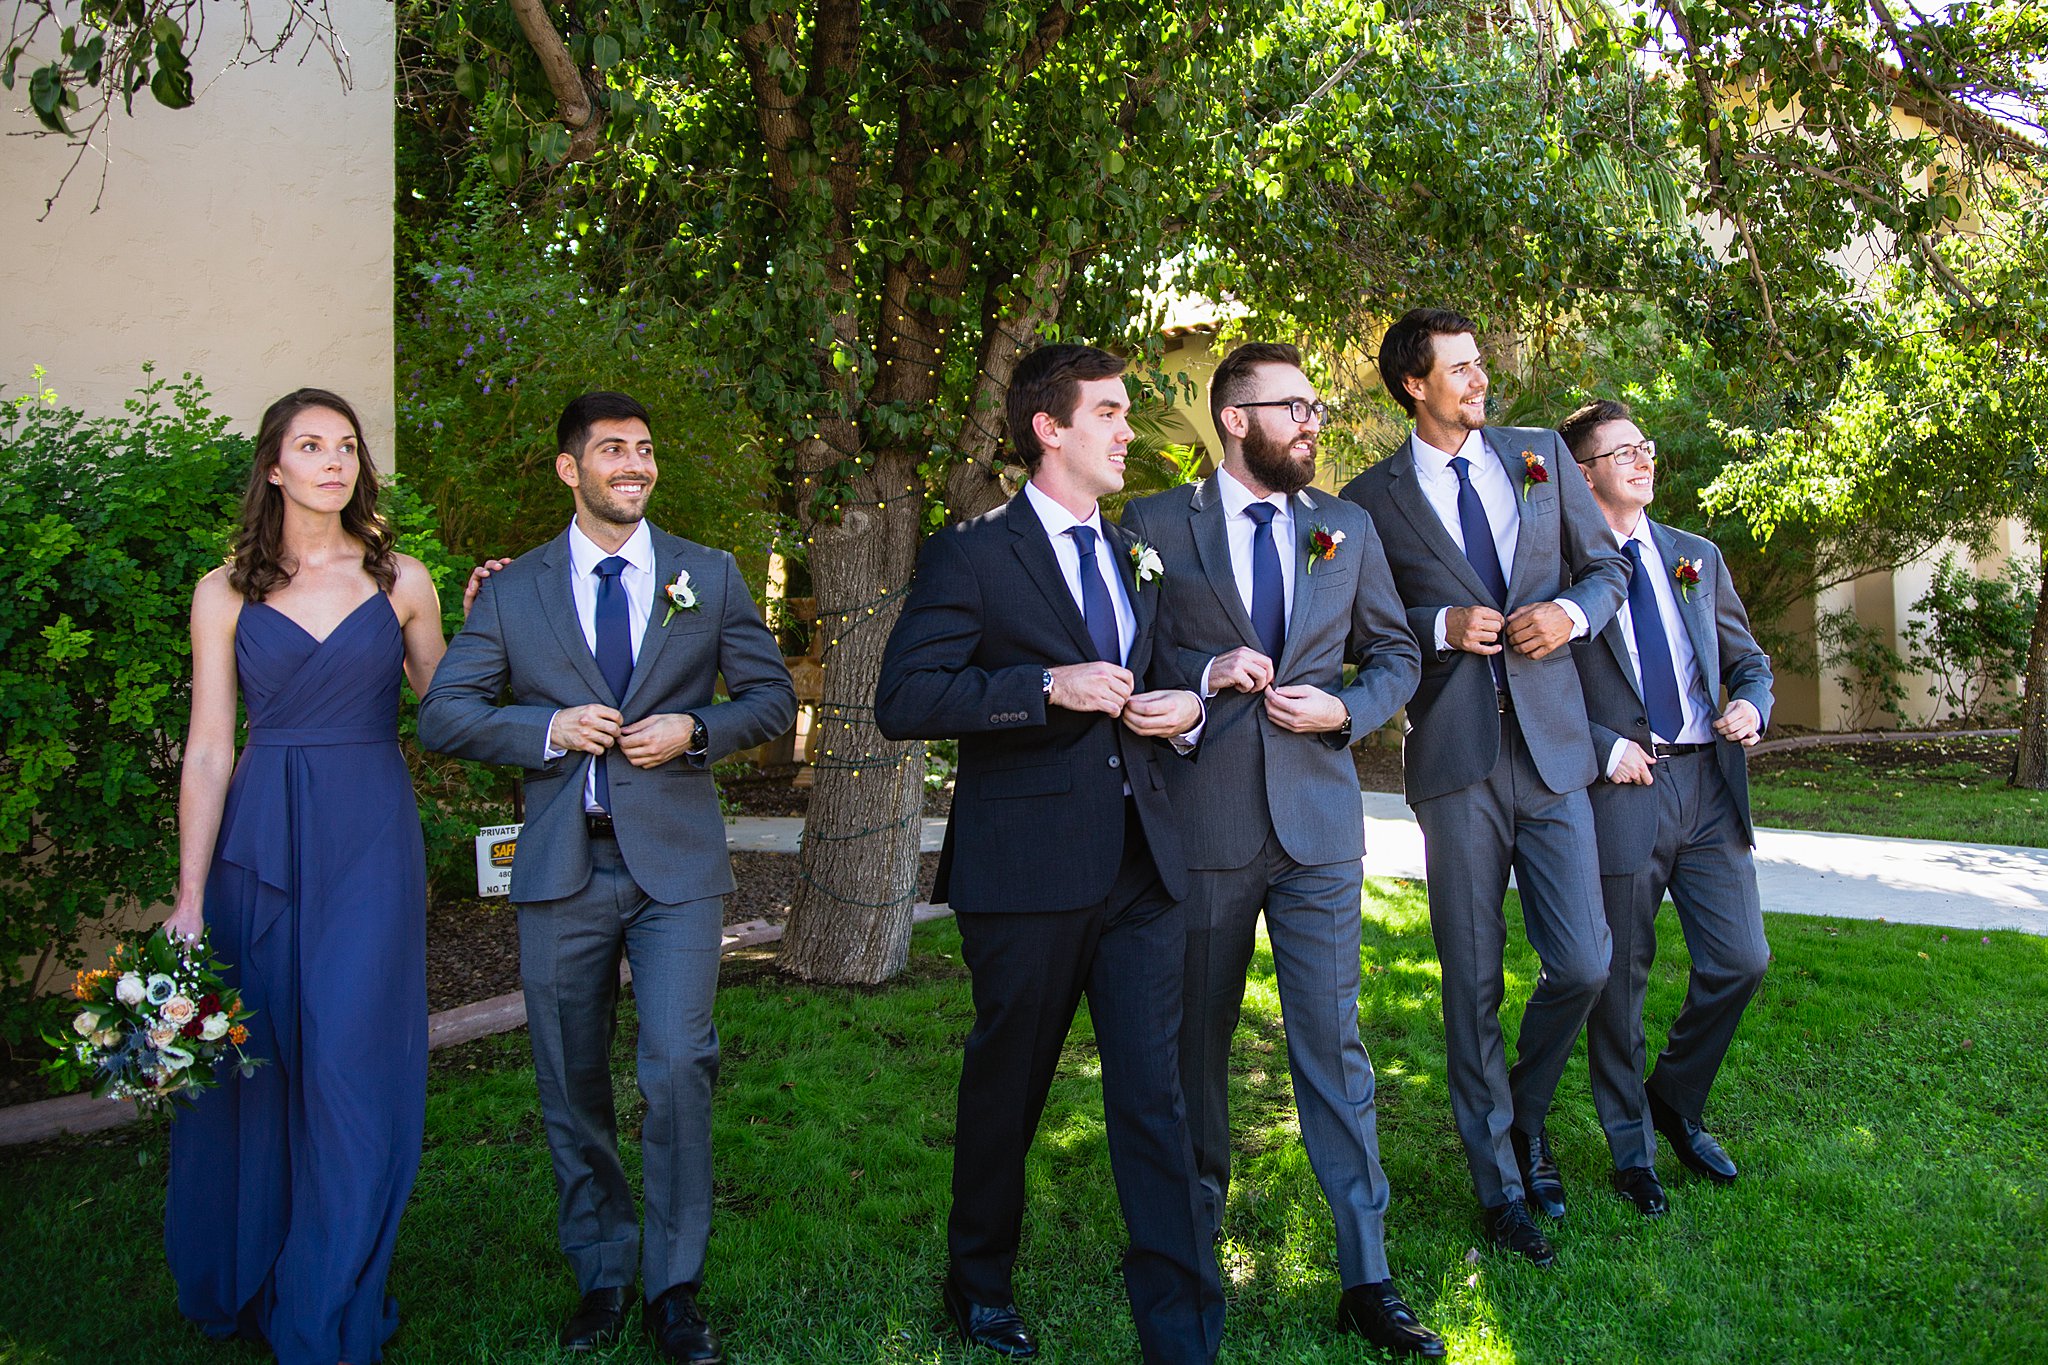 Groom and mixed gender bridal party together at a Secret Garden Events wedding by Arizona wedding photographer PMA Photography.